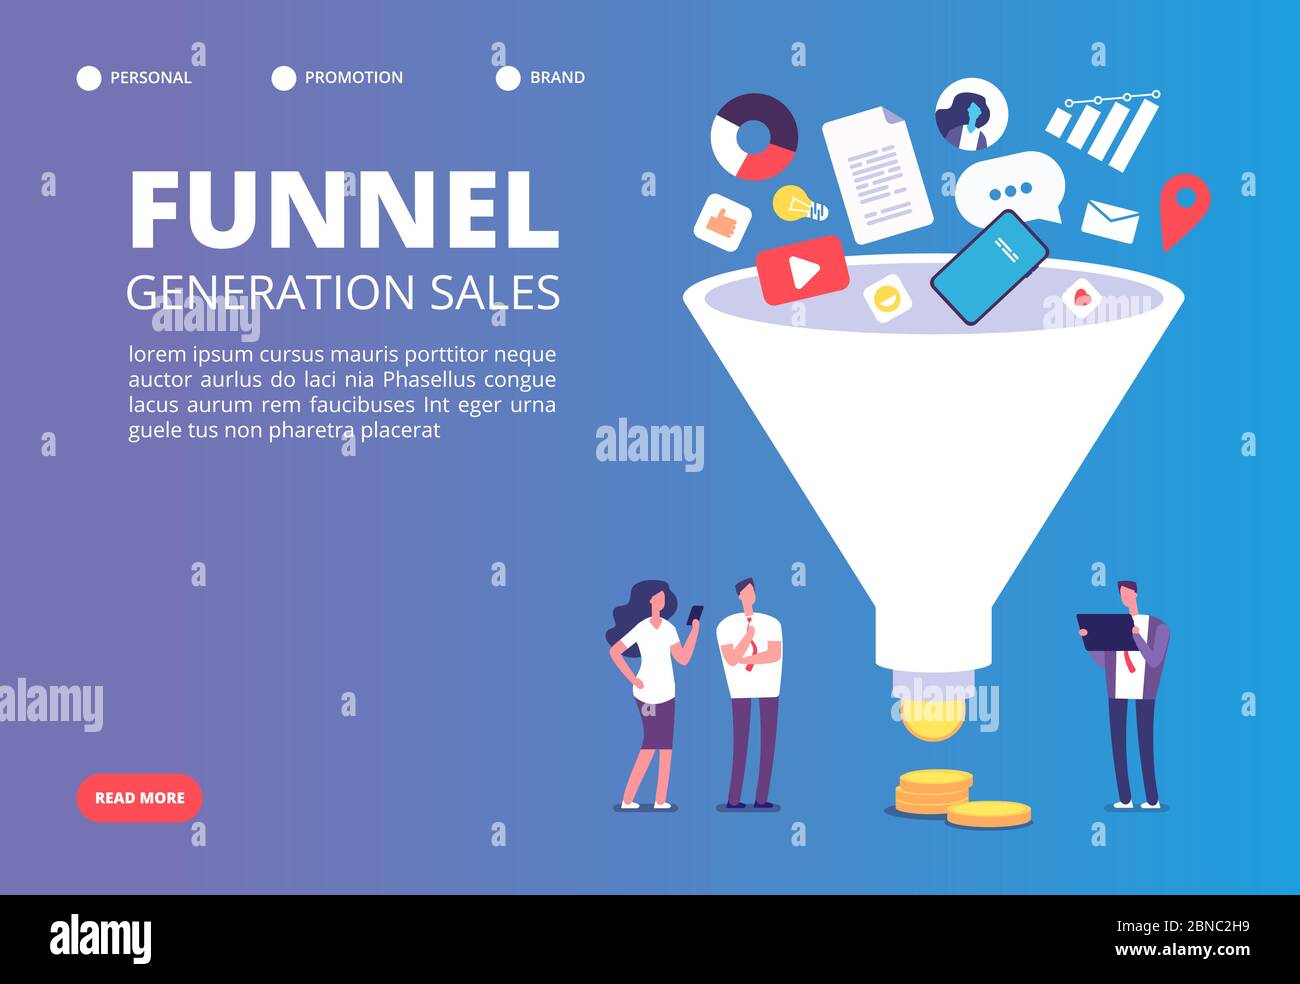 Funnel sale generation. Digital marketing funnel lead generations with buyers. Strategy, conversion rate optimization vector concept. Funnel marketing, generation and optimization sale illustration Stock Vector